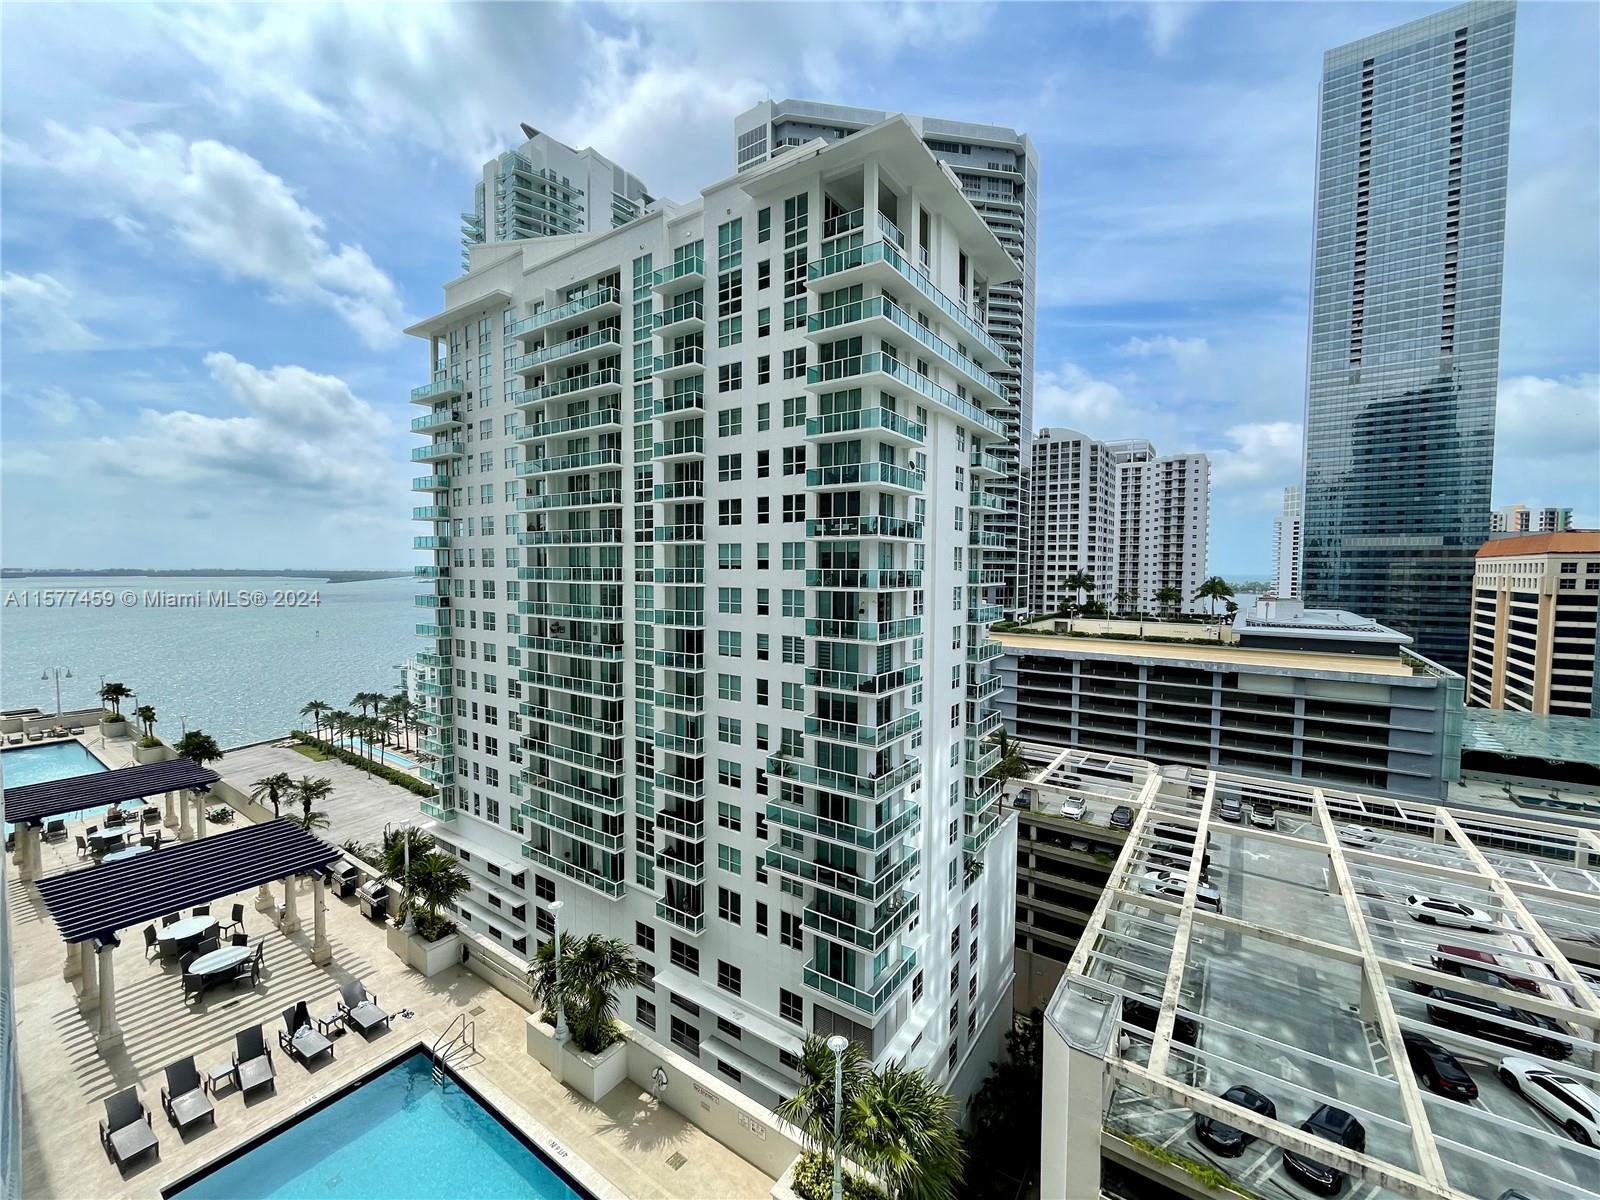 Chic 1BD/1BA condo in Brickell, perfect for Airbnb investors. Enjoy 825 sqft of modern living space 